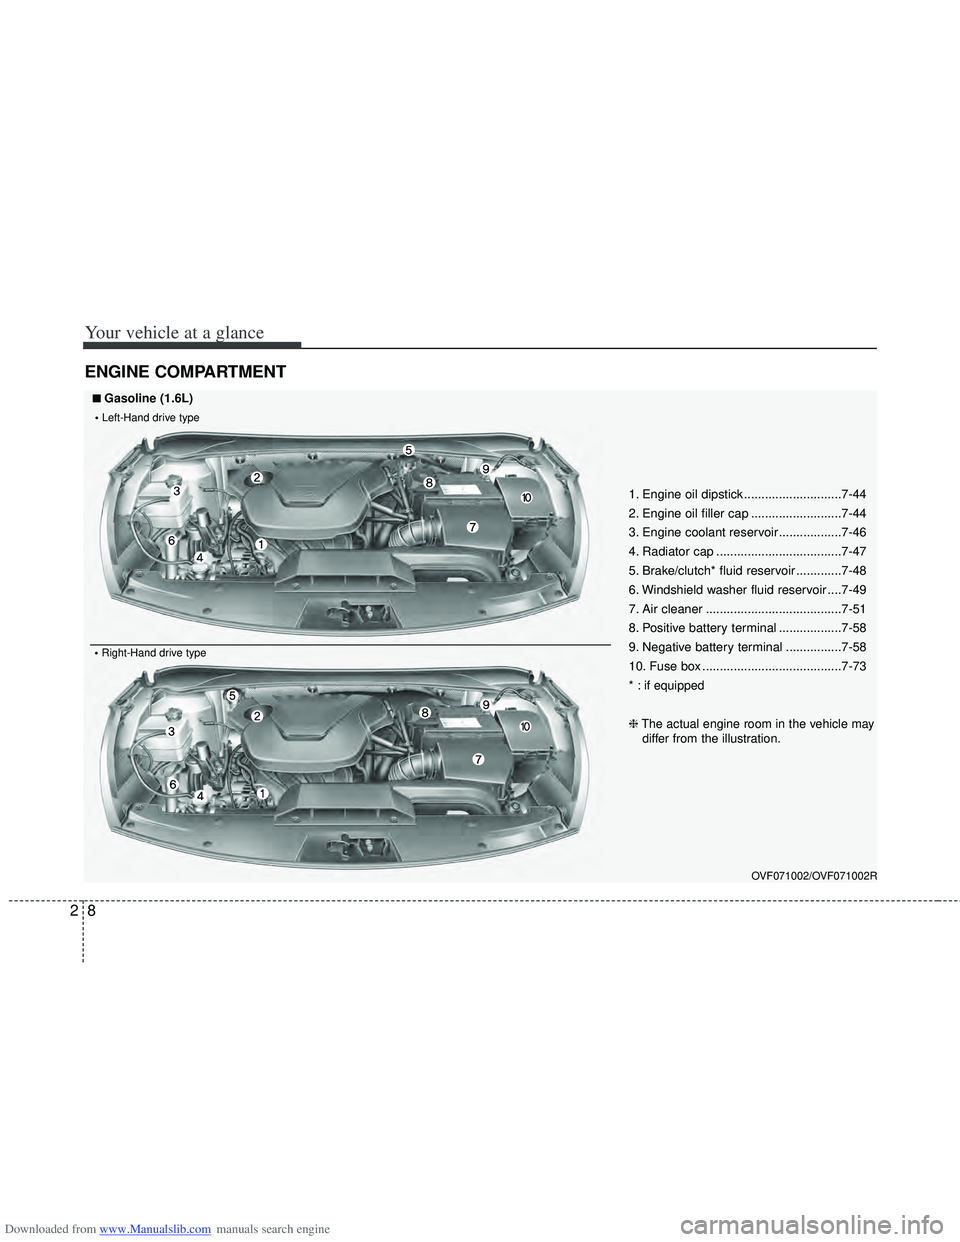 HYUNDAI I40 2019  Owners Manual Downloaded from www.Manualslib.com manuals search engine Your vehicle at a glance
82
ENGINE COMPARTMENT
OVF071002/OVF071002R
1. Engine oil dipstick ............................7-44
2. Engine oil fille